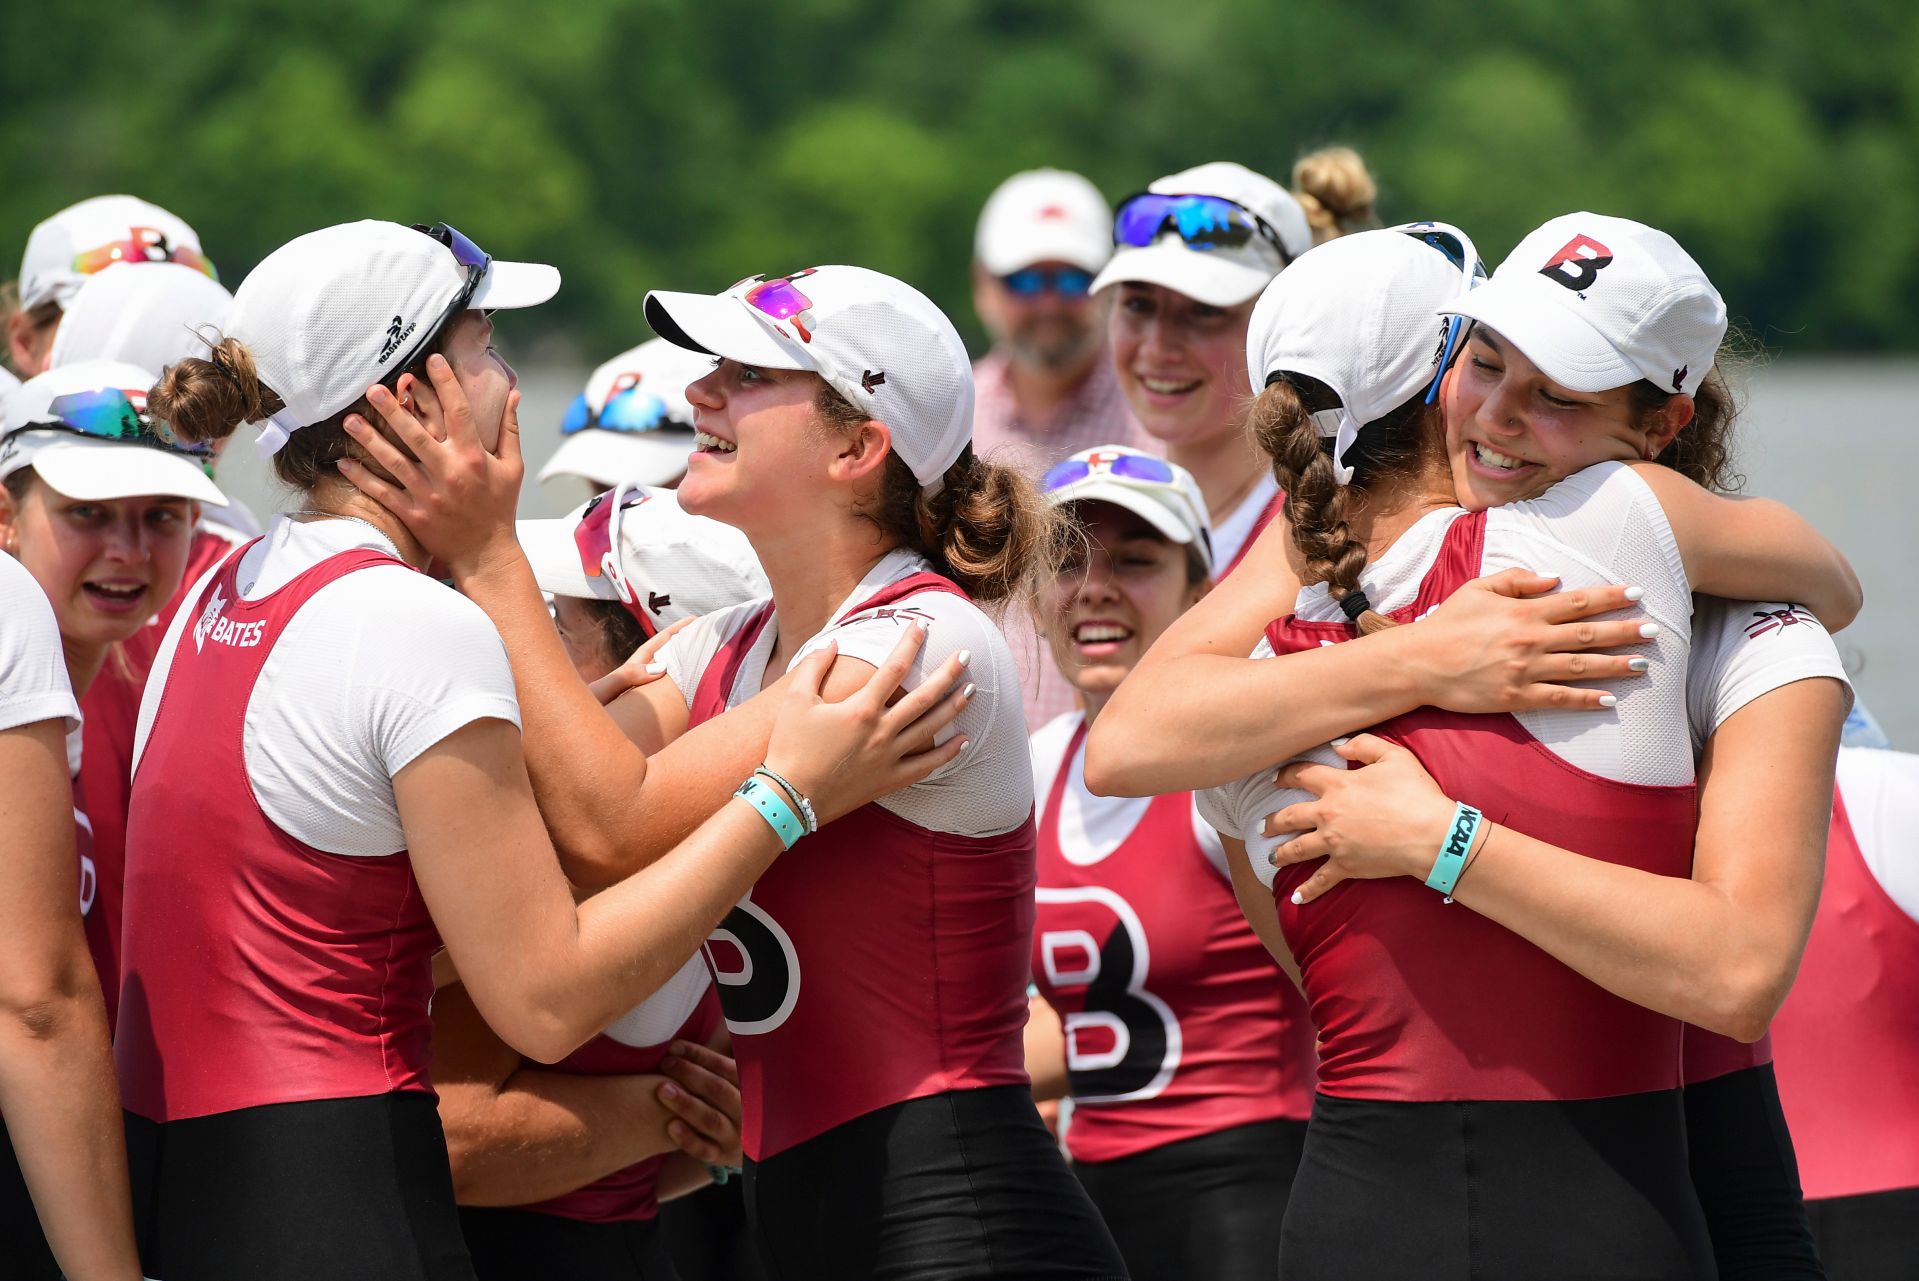 Bates rowers celebrate after winning the 2019 NCAA Division III Championship on June 1 in Indianapolis, Indiana. (Photo by Justin Tafoya/NCAA Photos via Getty Images)